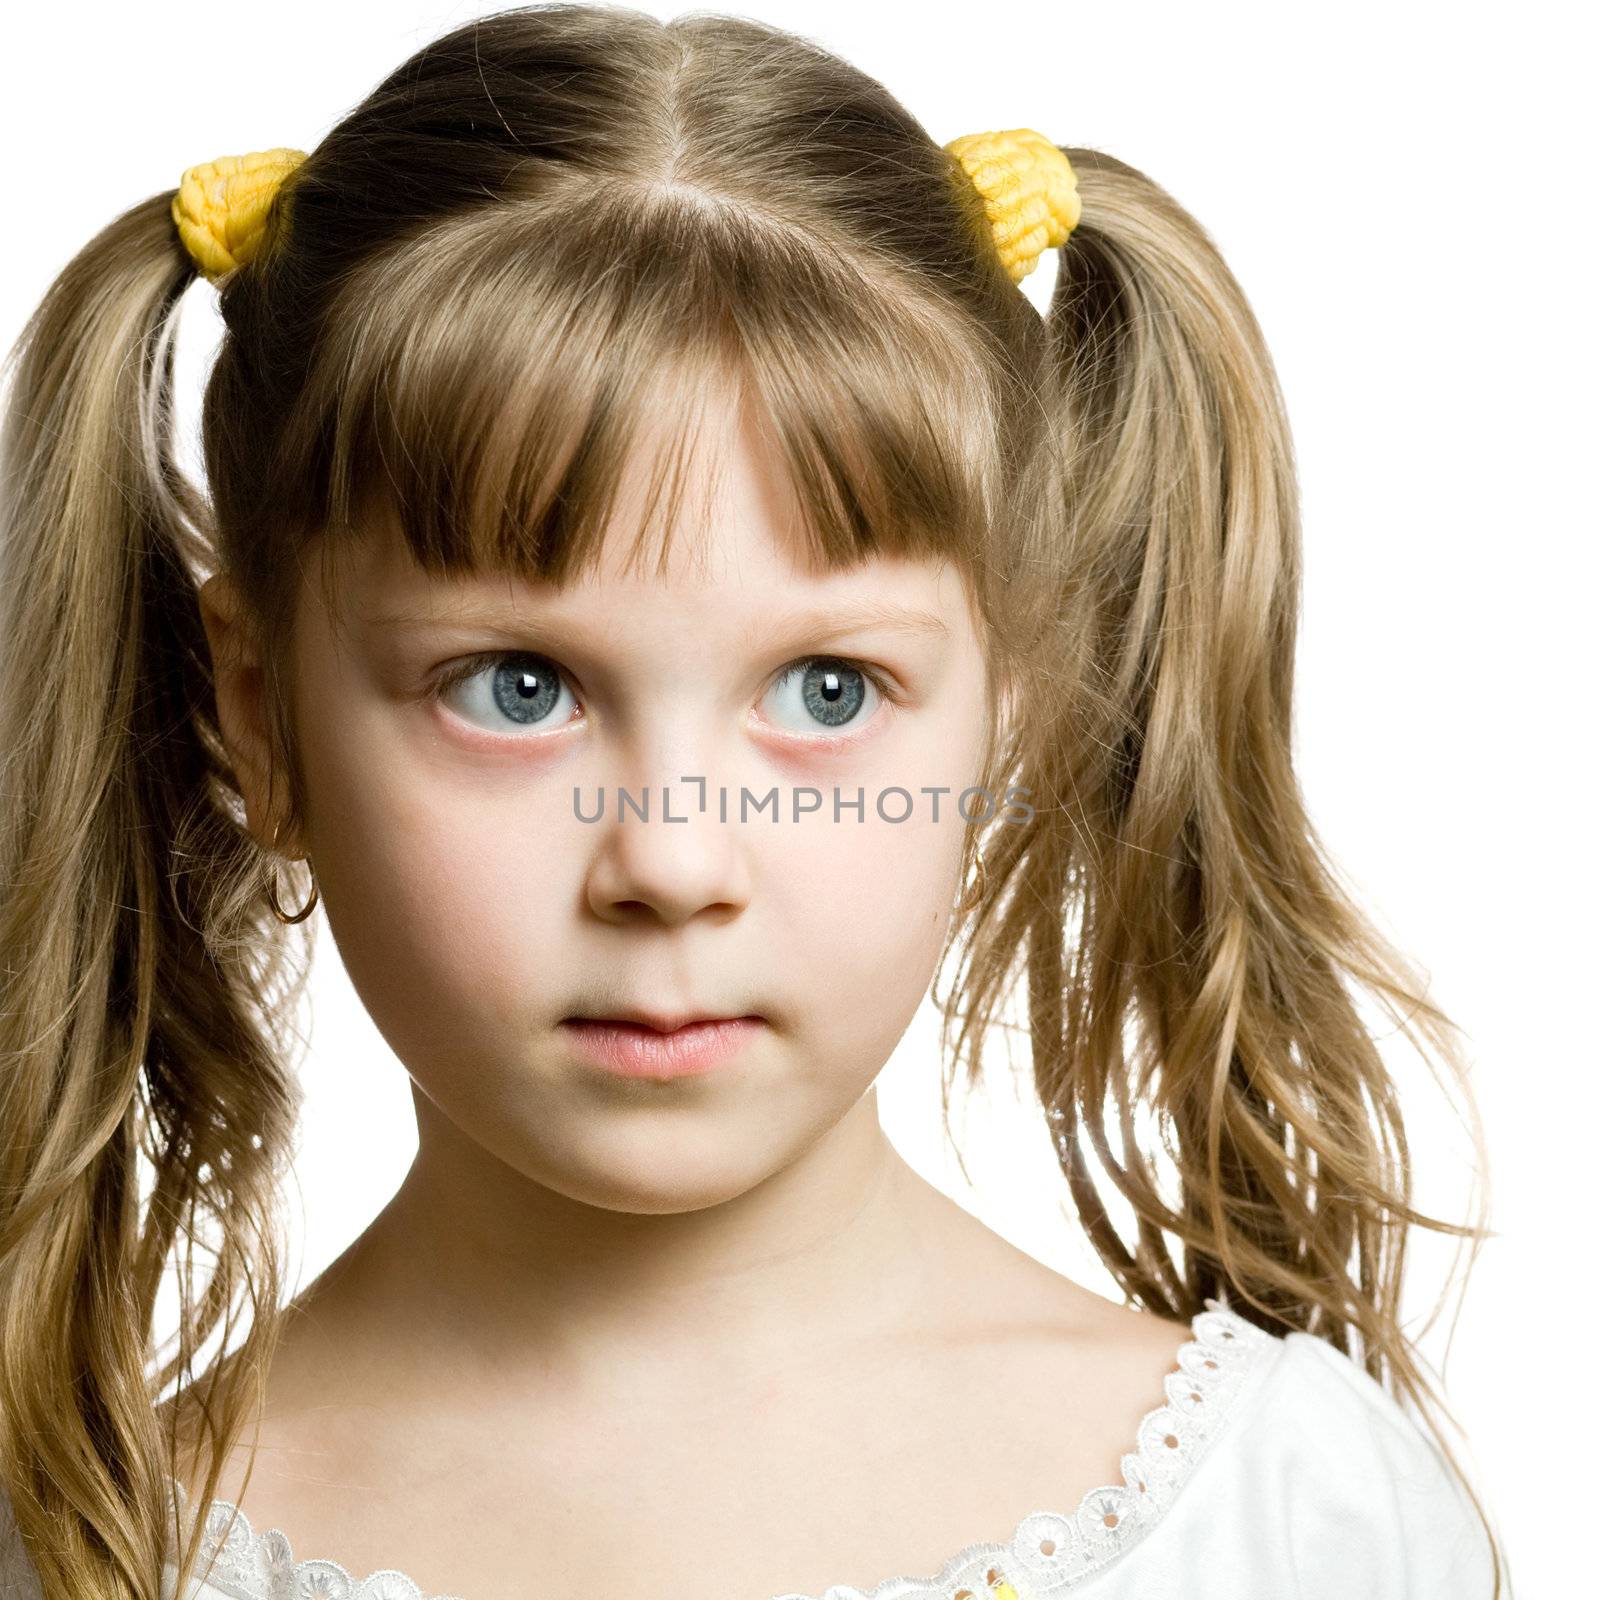 Stock photo: an image of a portrait of a cute girl